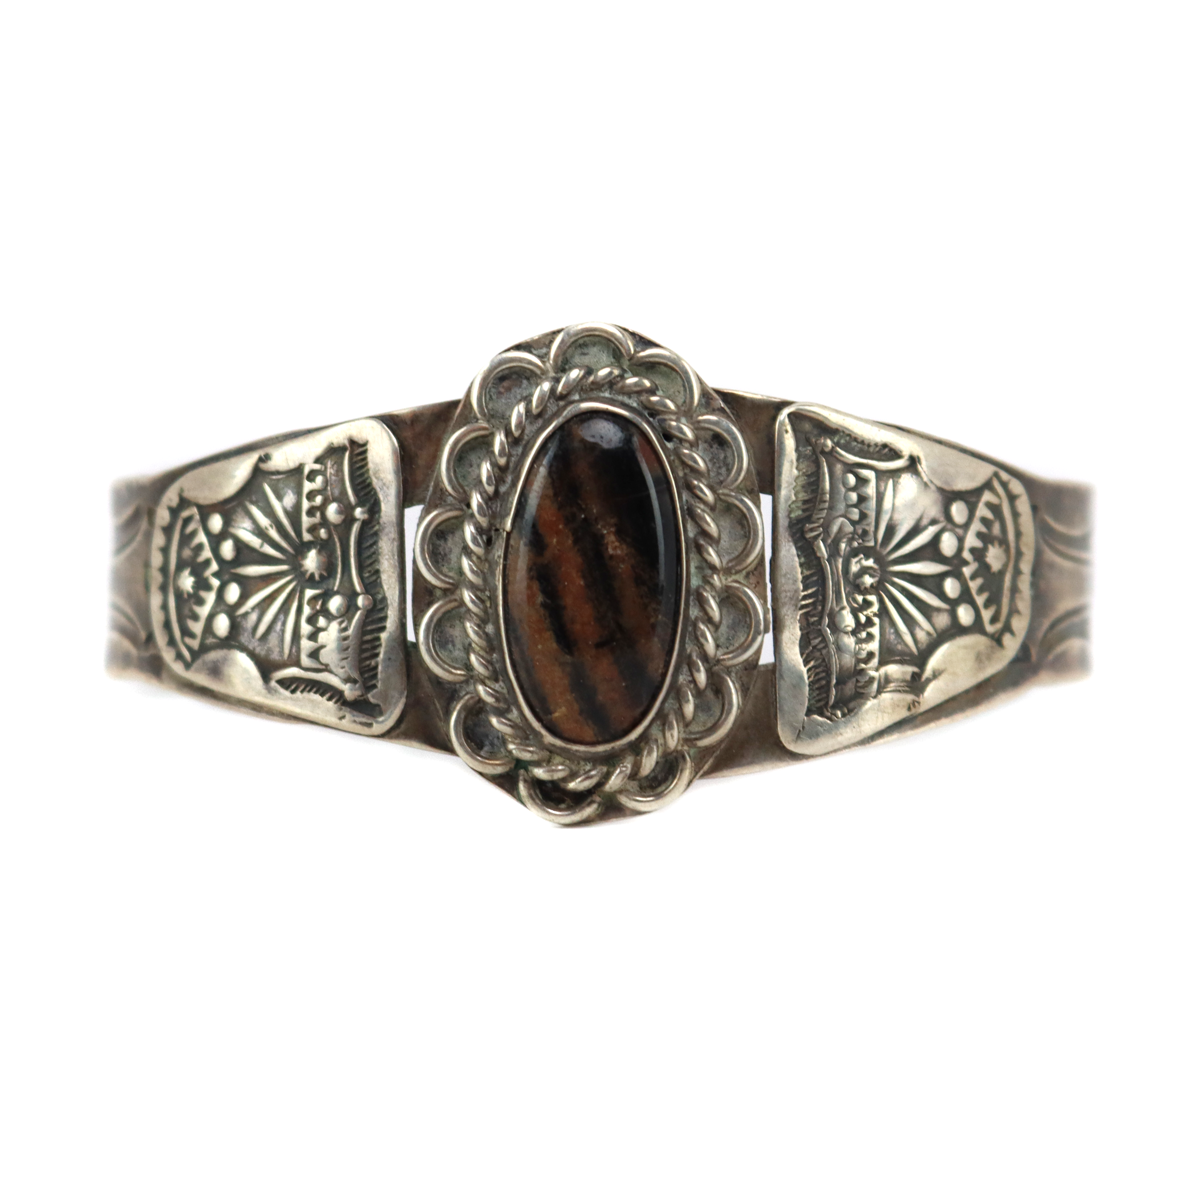 Navajo - Petrified Wood and Silver Bracelet with Stamped Design c. 1930-40s, size 7 (J16061)